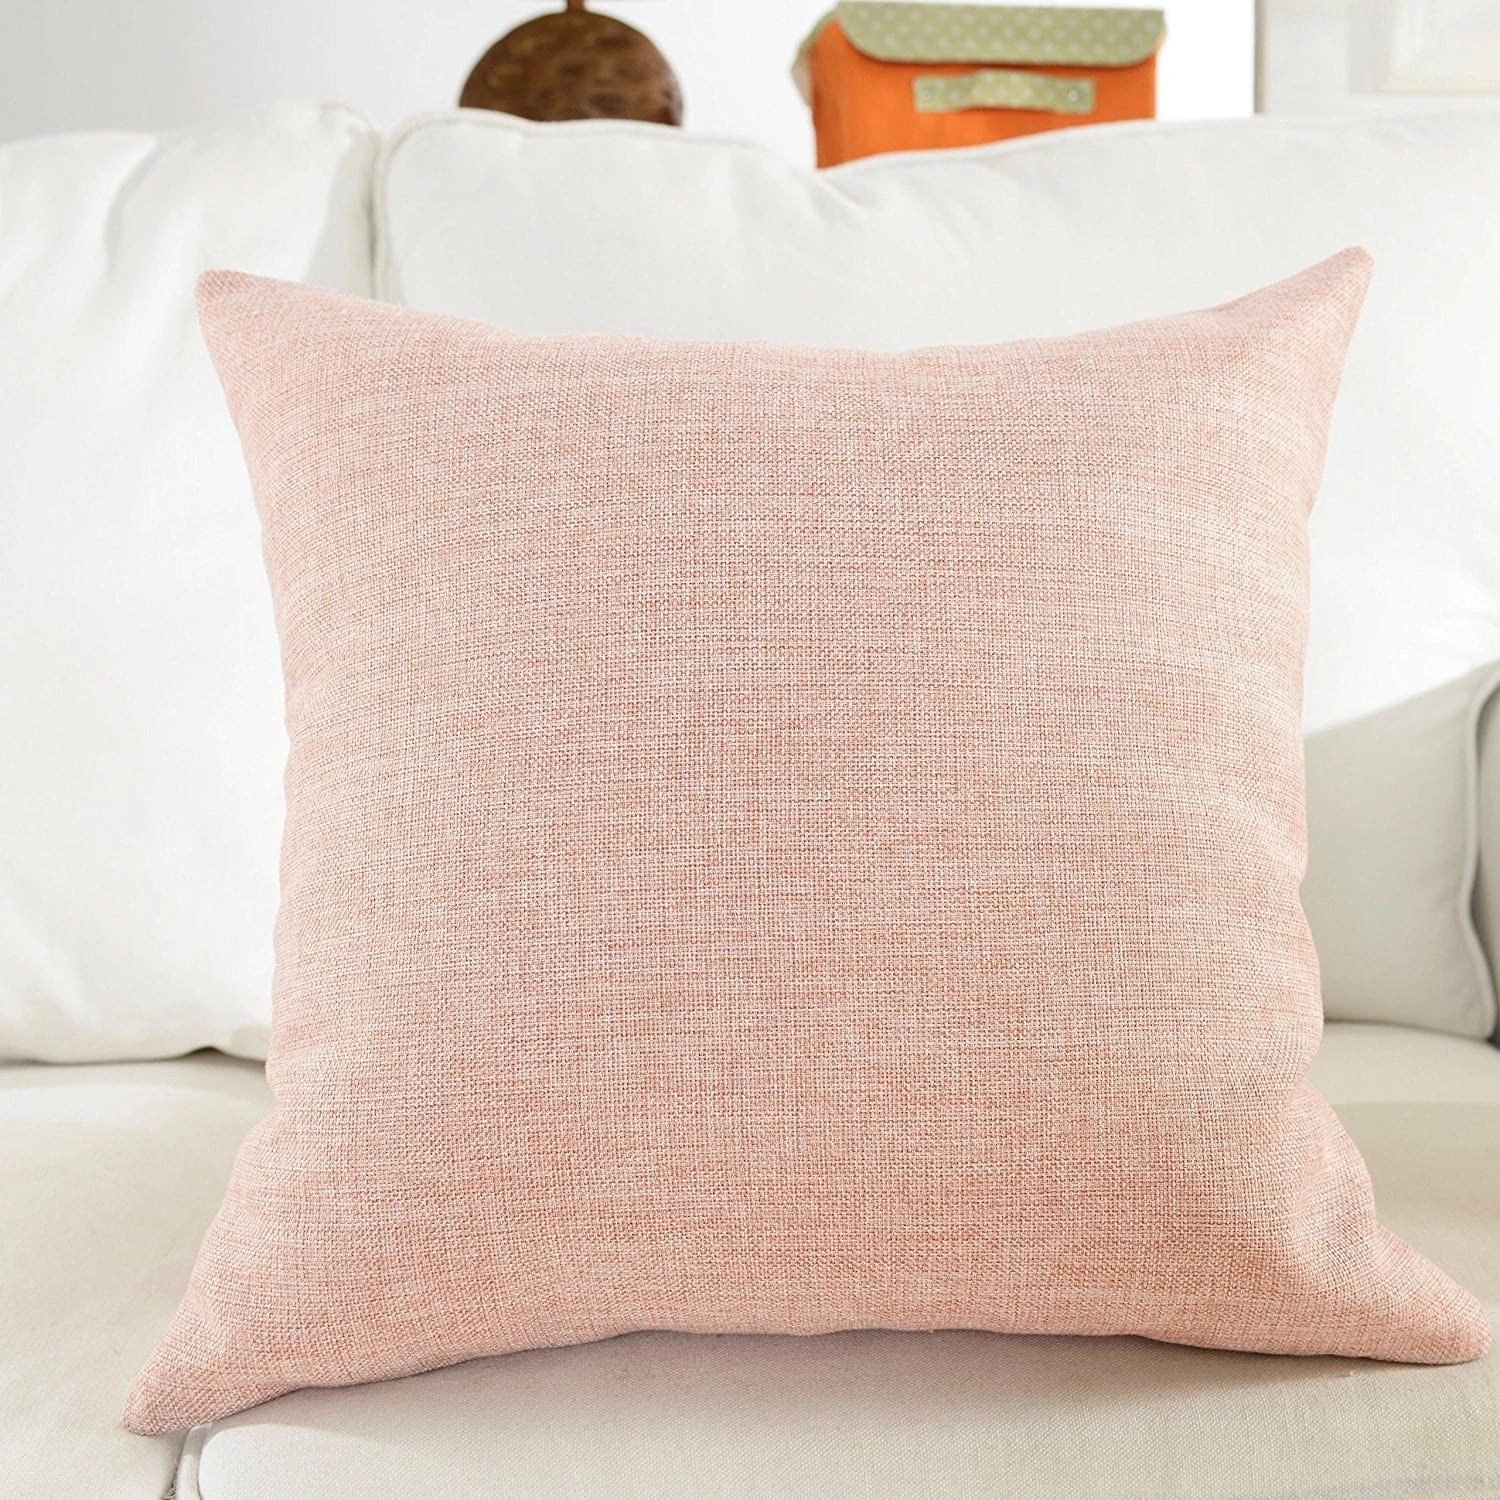 Snag This Look - Blush and Grey Bedroom - Blush Pillow